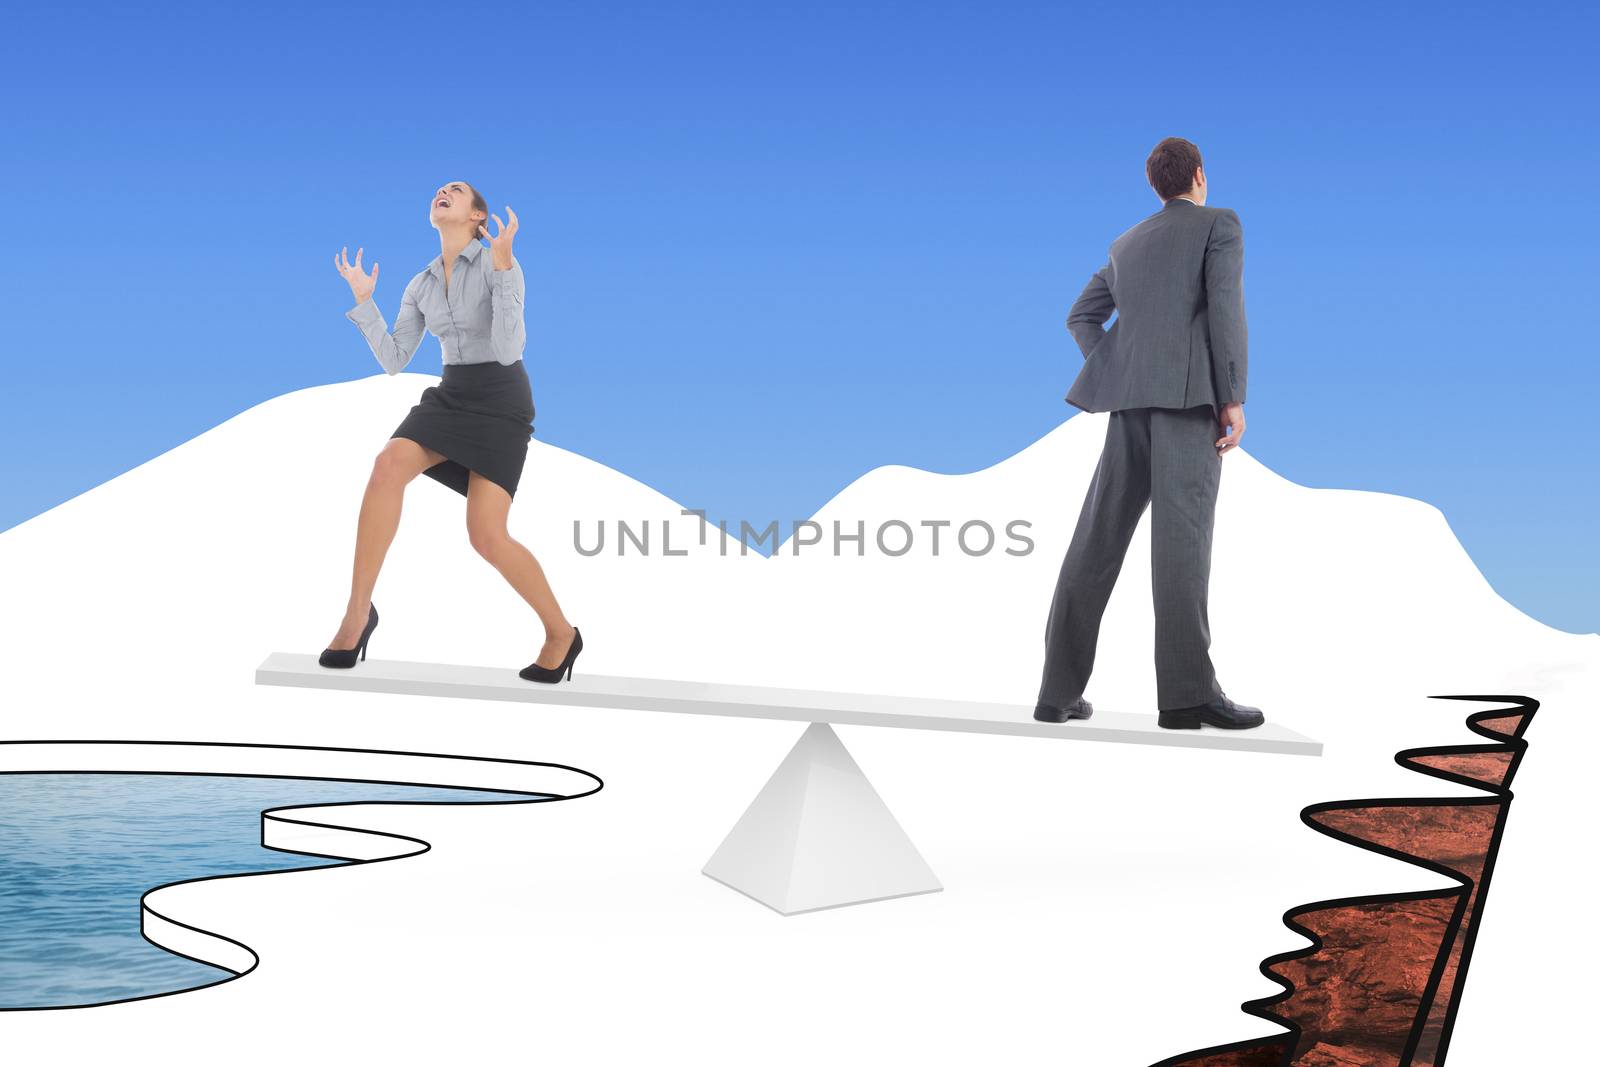 White scales weighing businessman and businesswoman over cliff edge and water on either side